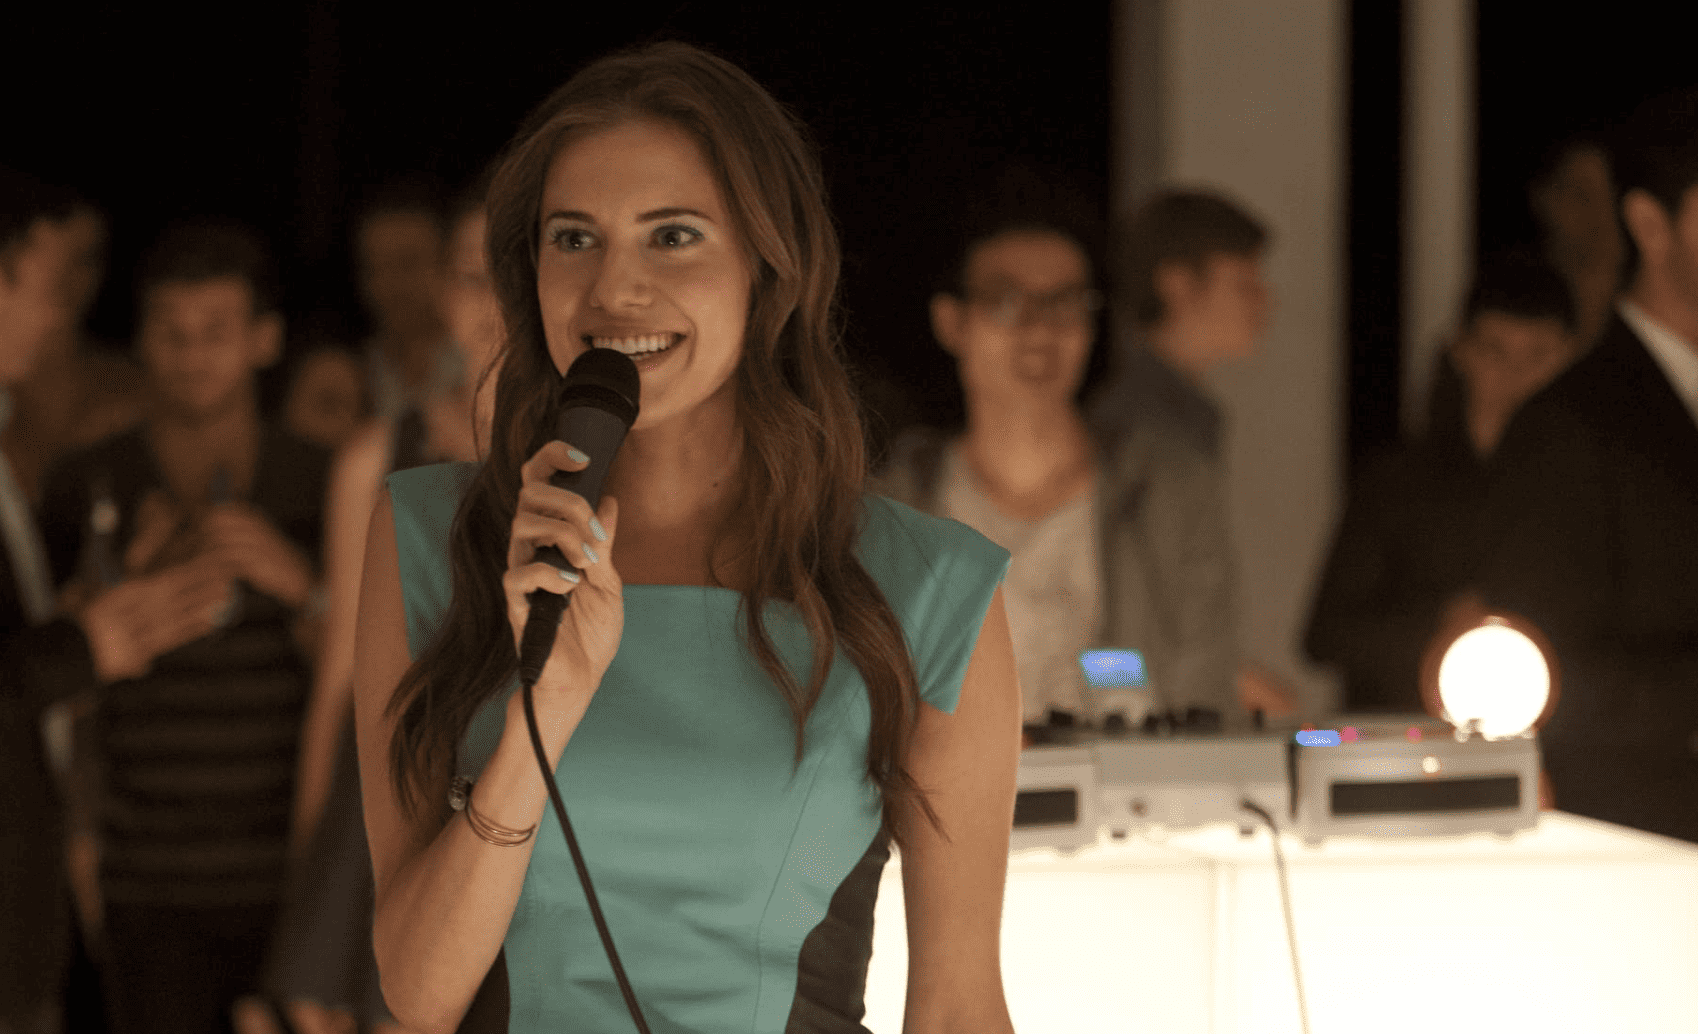 Marnie standing on a dance floor, ready to sing in this image from Apatow Productions